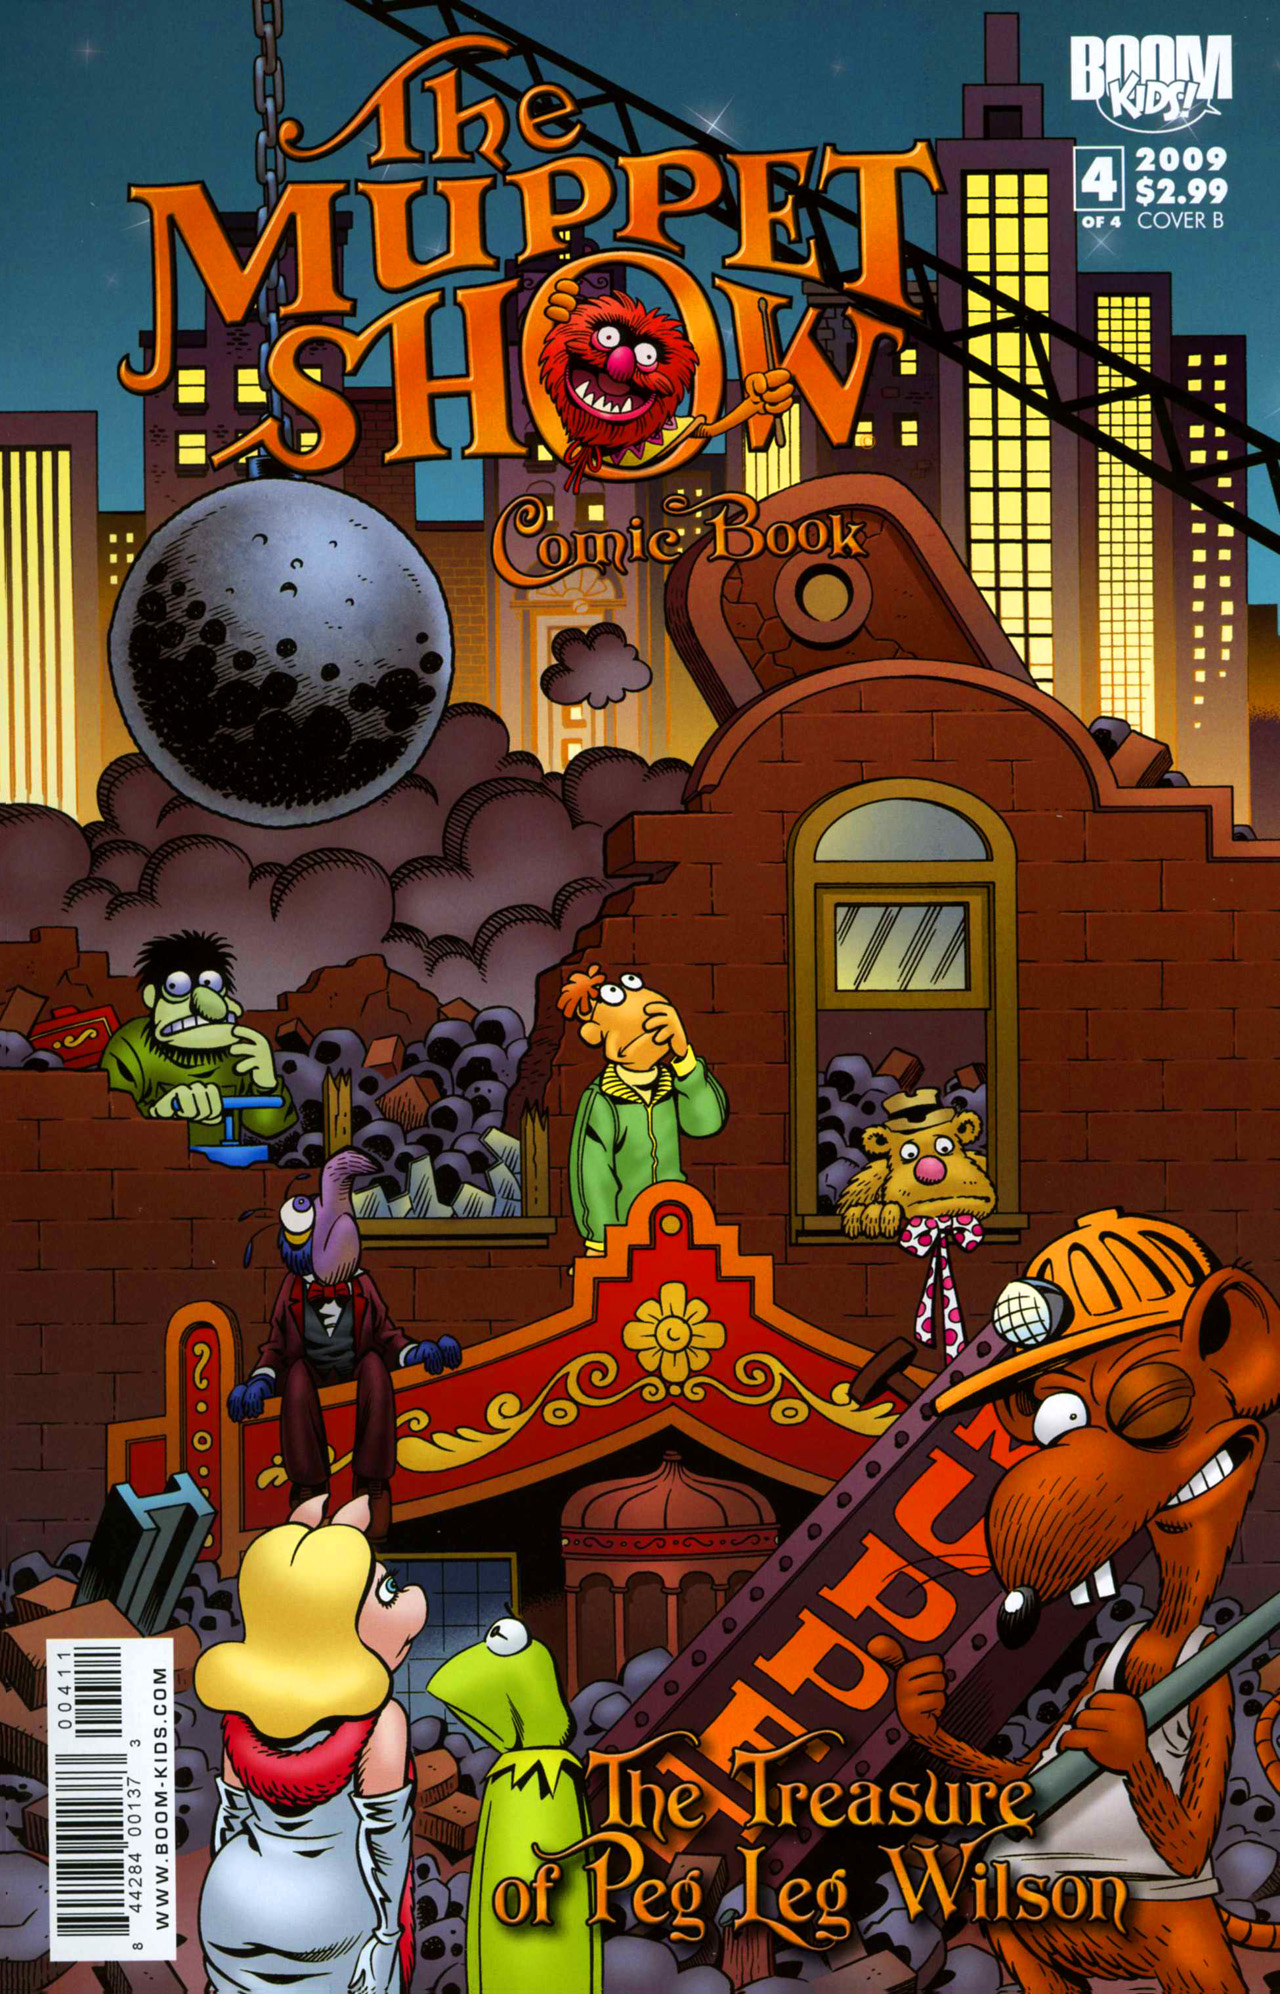 Read online The Muppet Show: The Treasure of Peg-Leg Wilson comic -  Issue #4 - 2